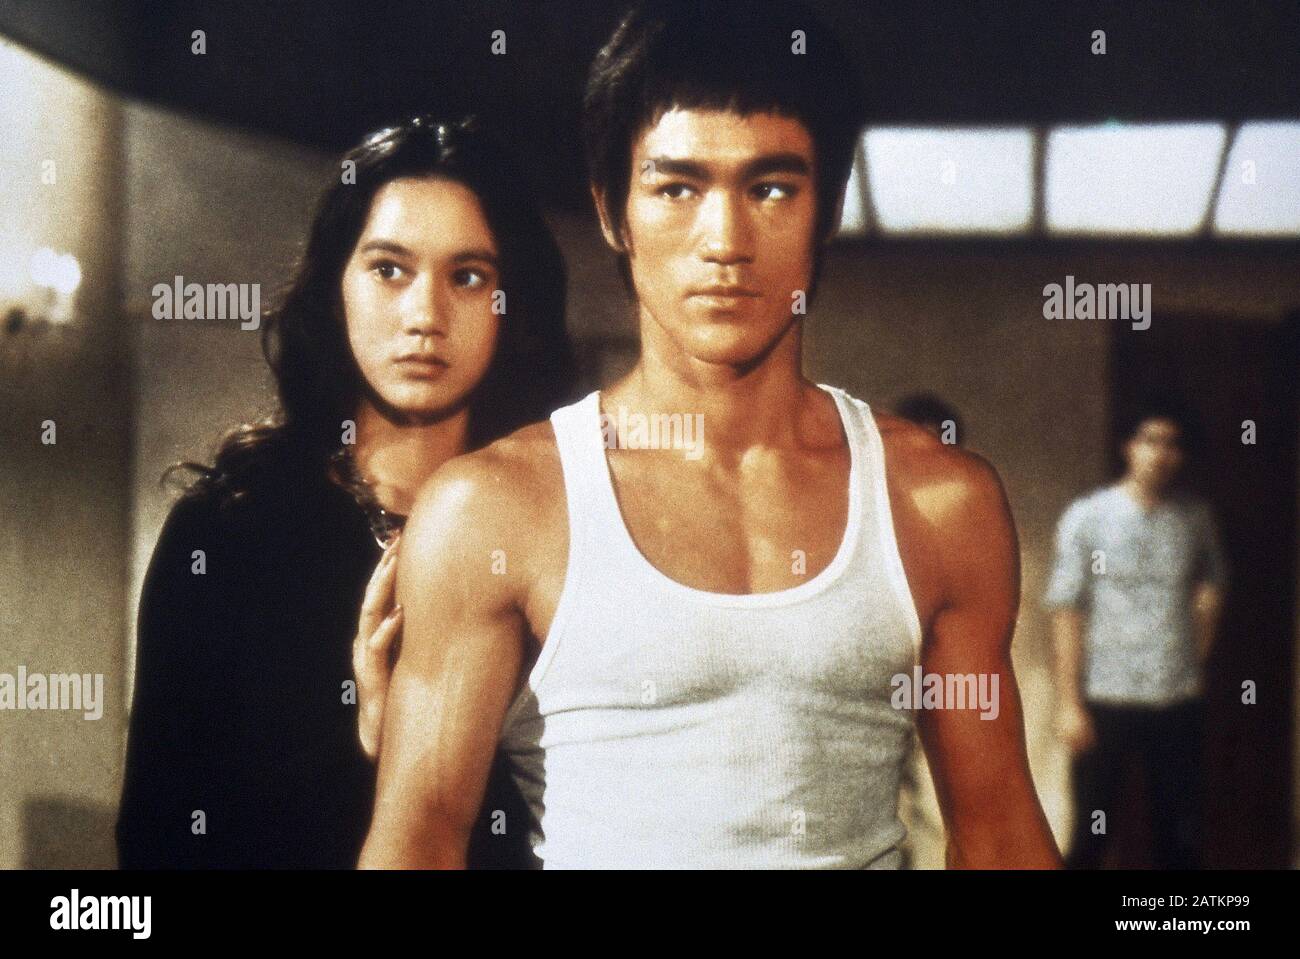 Bruce Lee, 'Fist Of Fury' Aka 'The Chinese Connection' (1972) Golden Harvest Company / Cinema Legacy Collection File Reference # 33962-016tha Foto de stock